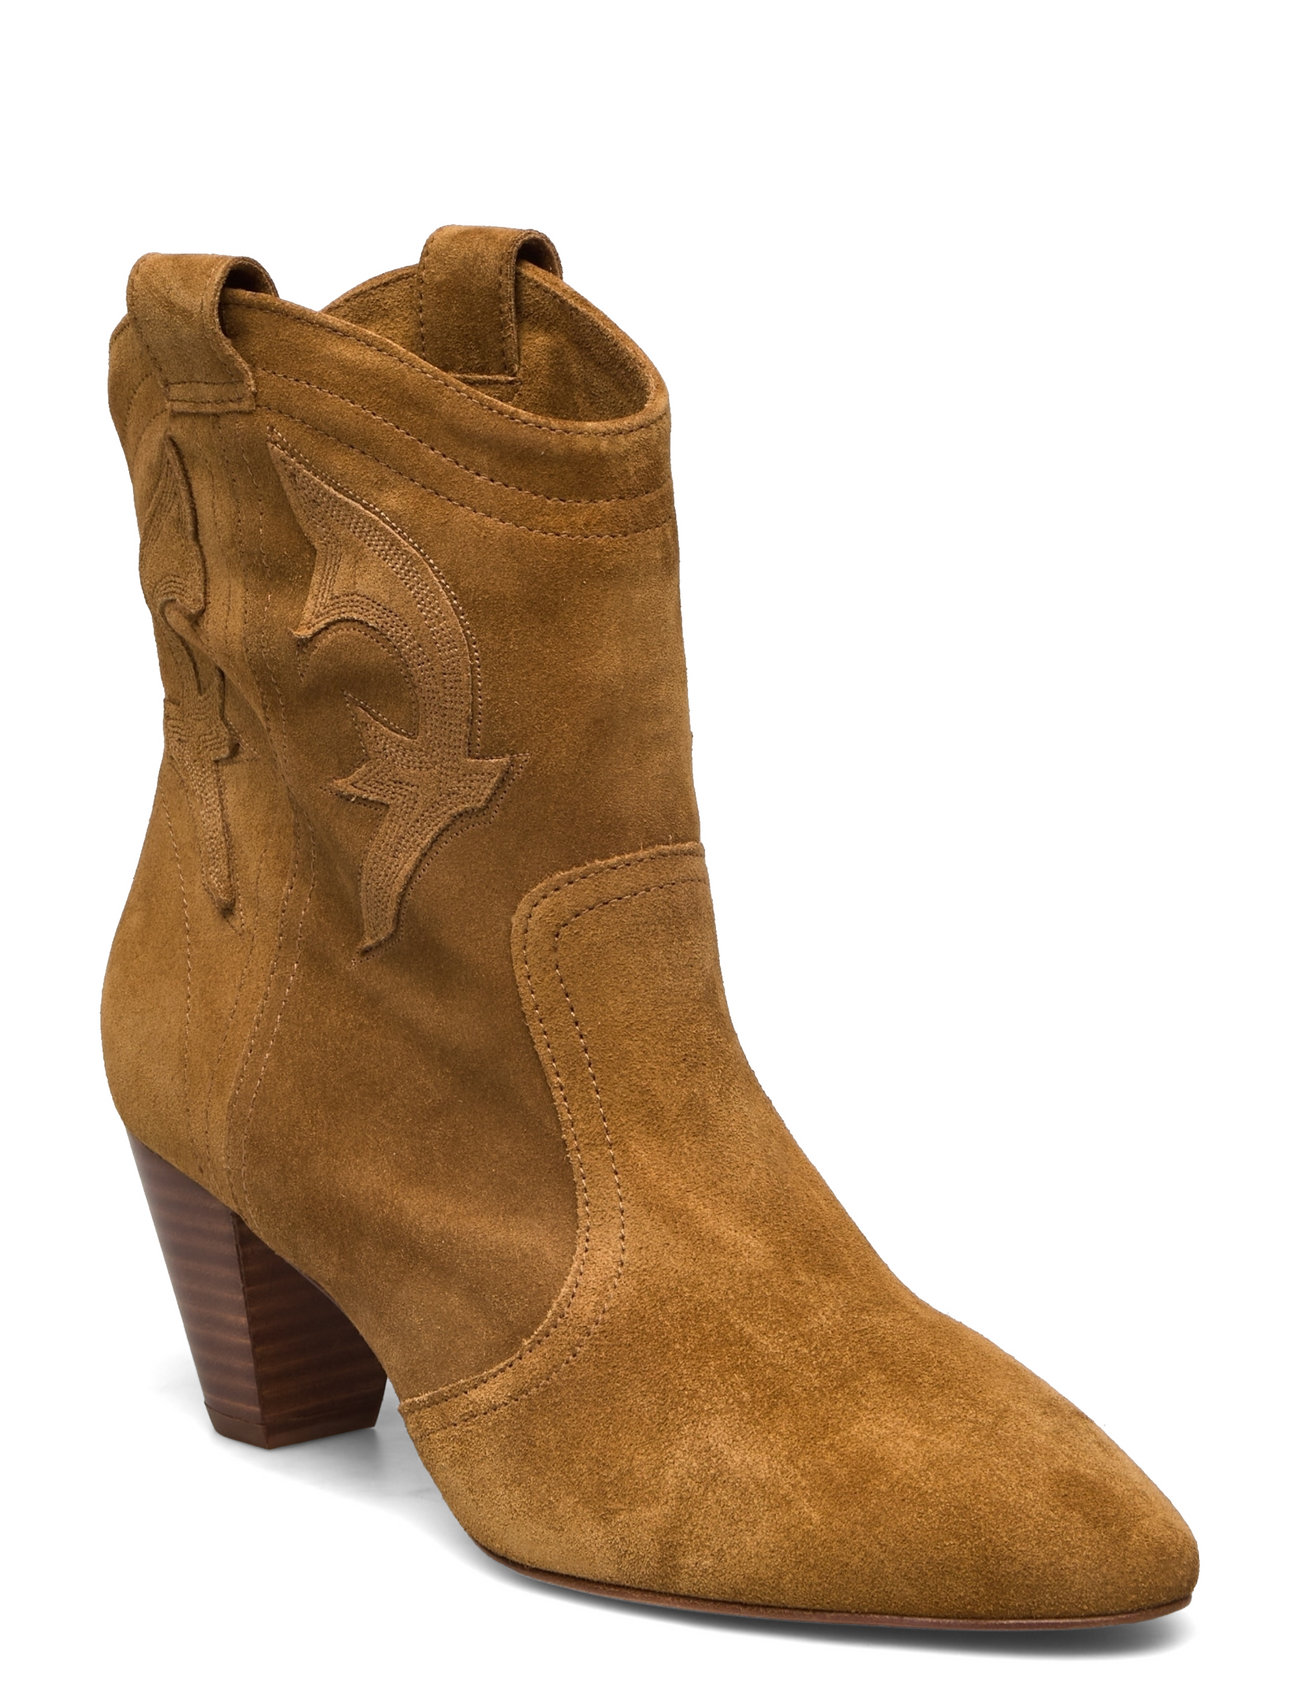 ba&sh Ankle Boots Canyon - Ankle boots 